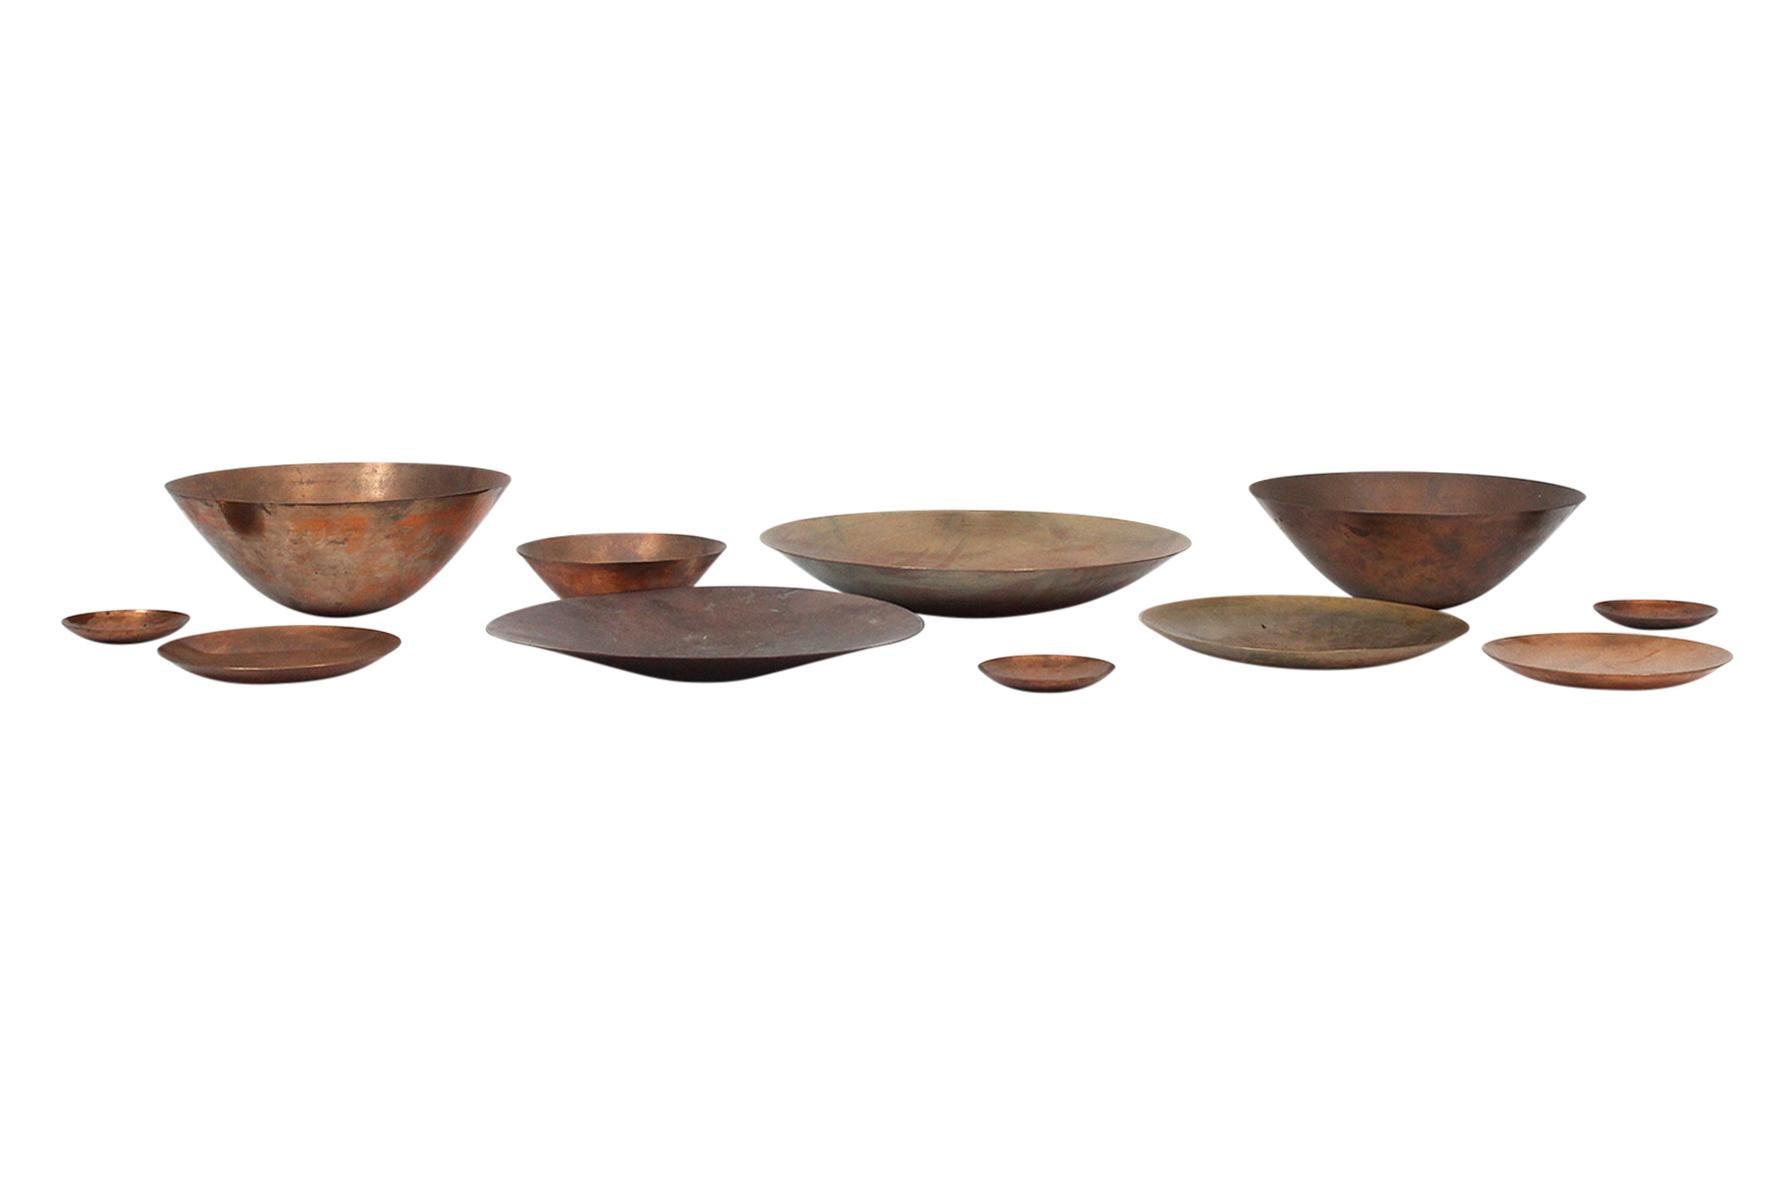 Rare and large collection of hand spun brass and bronze chargers and bowls by American artist Ronald Hayes Pearson. Primarily a jeweler, Pearson used different alloys of metal in his spun vessels giving each piece a unique coloration and patina.